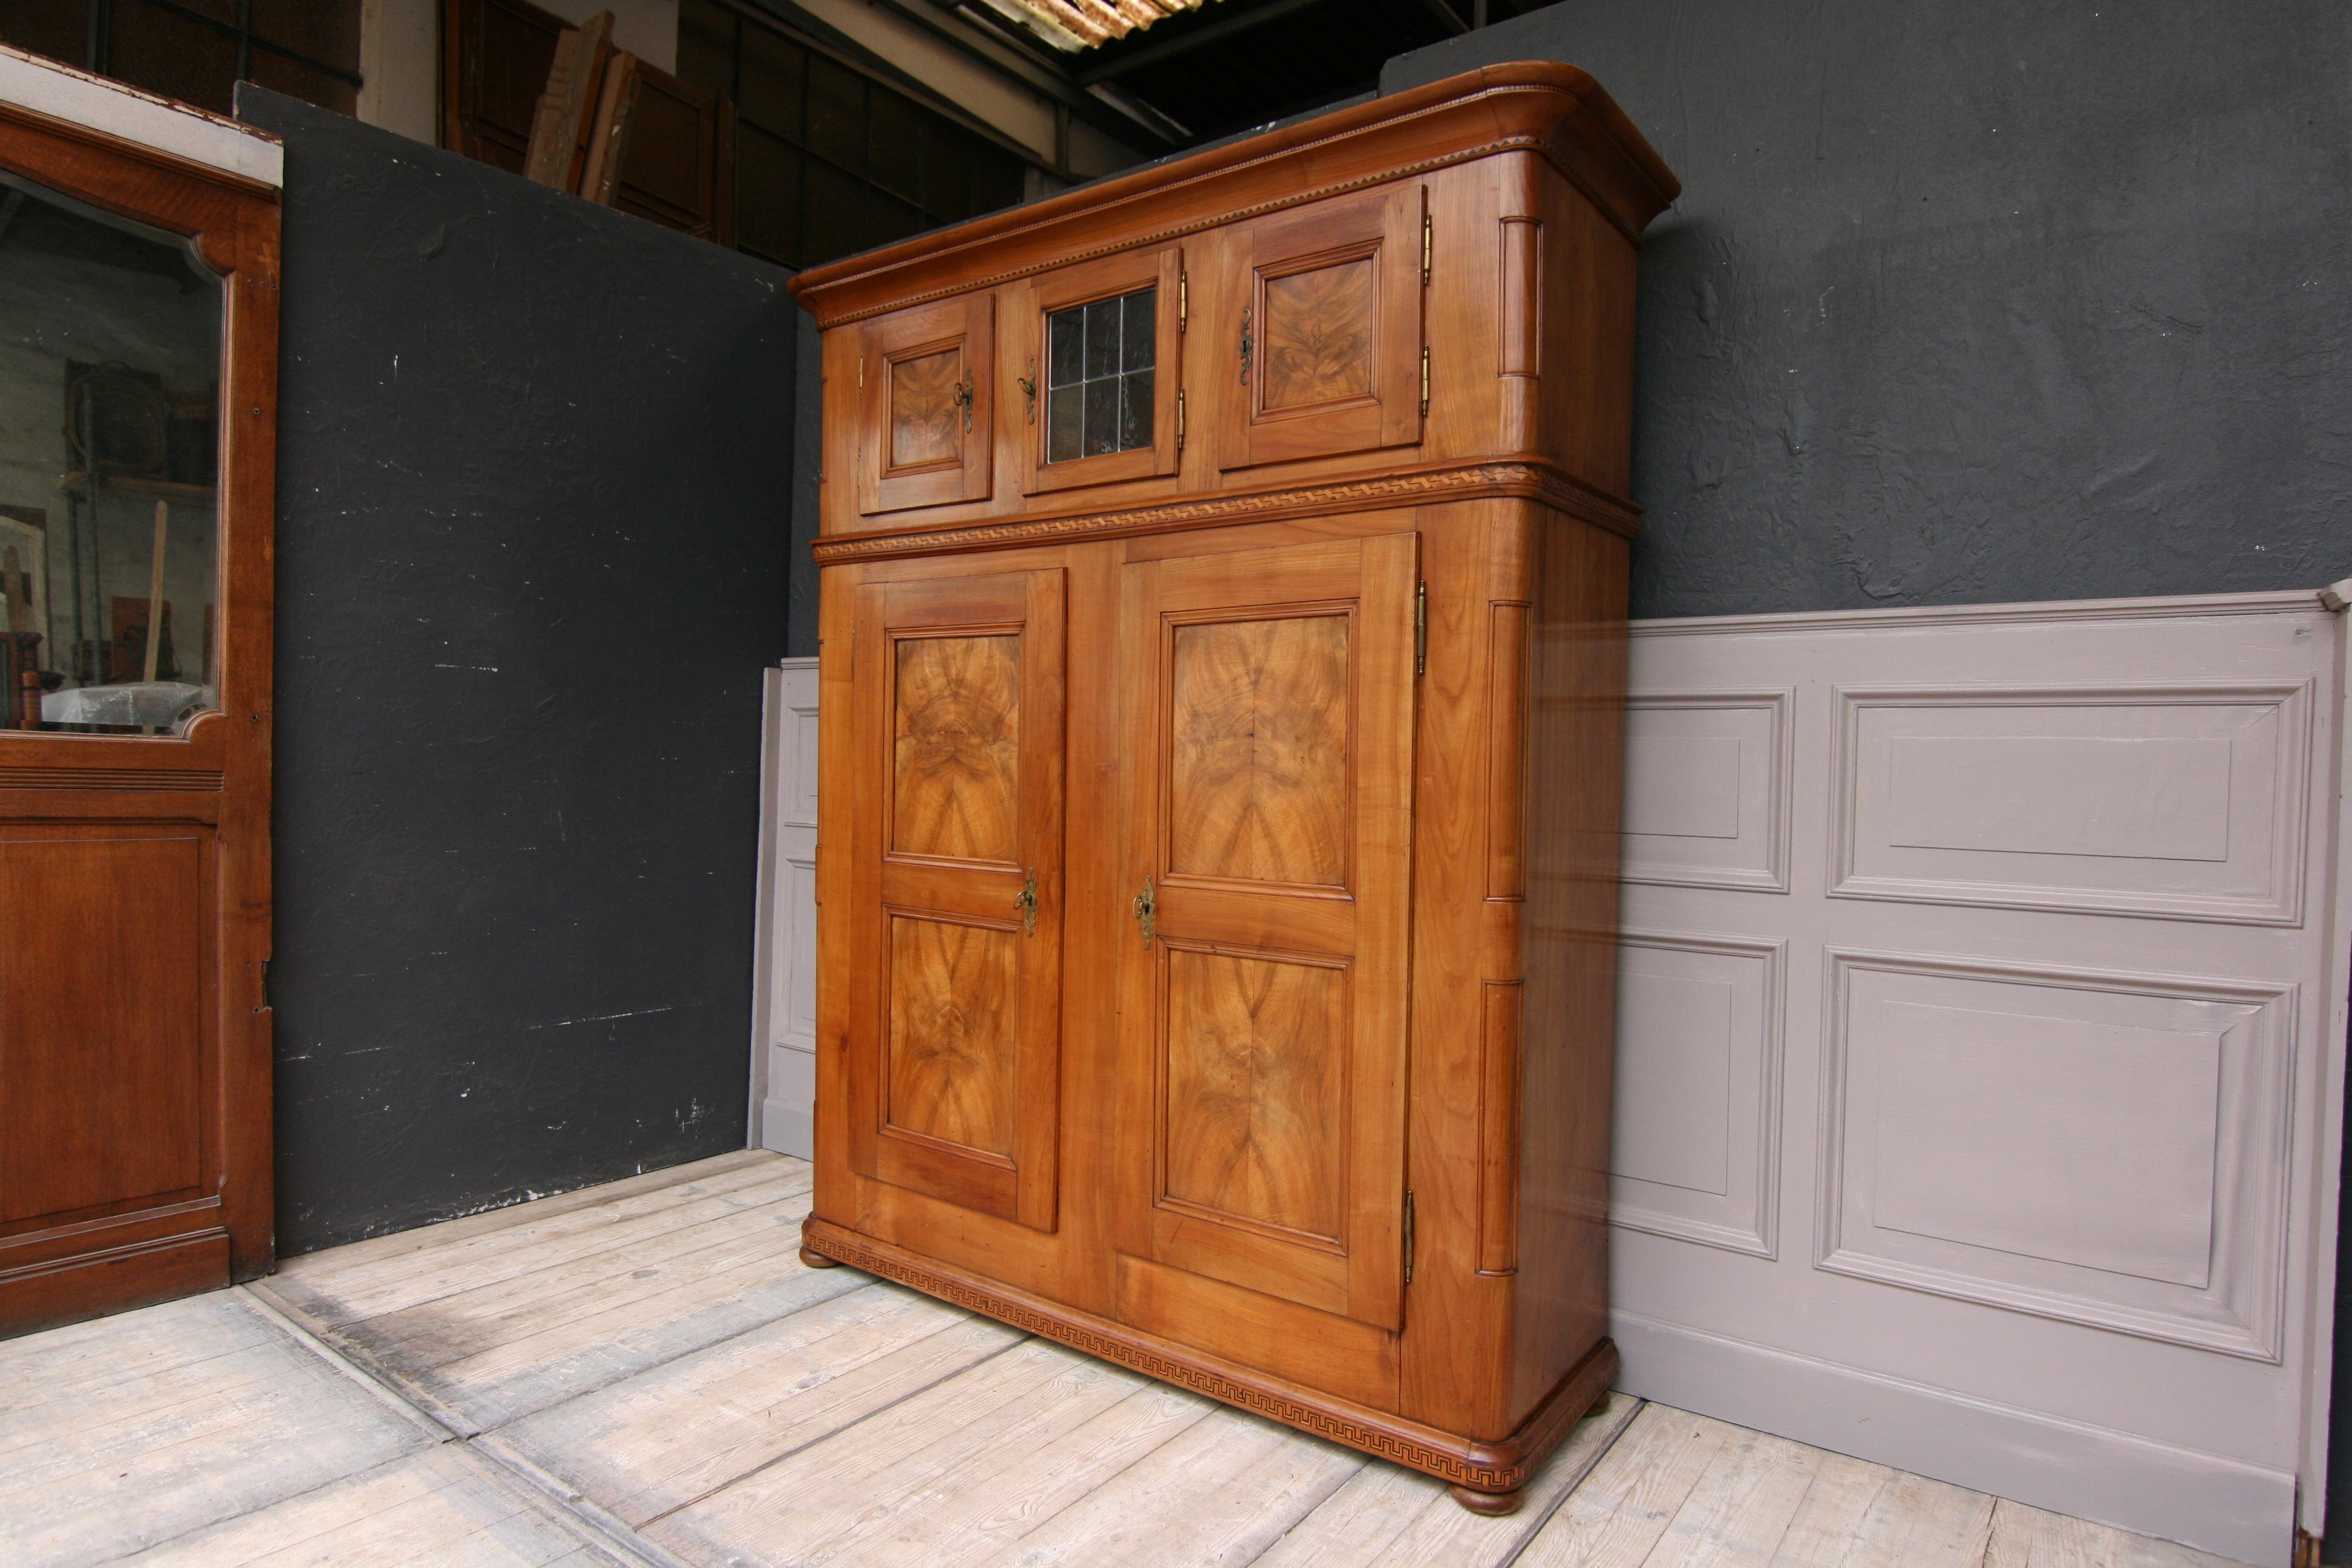 Fruitwood Early 19th Century Swiss Cupboard made of Cherry Wood with Marquetry